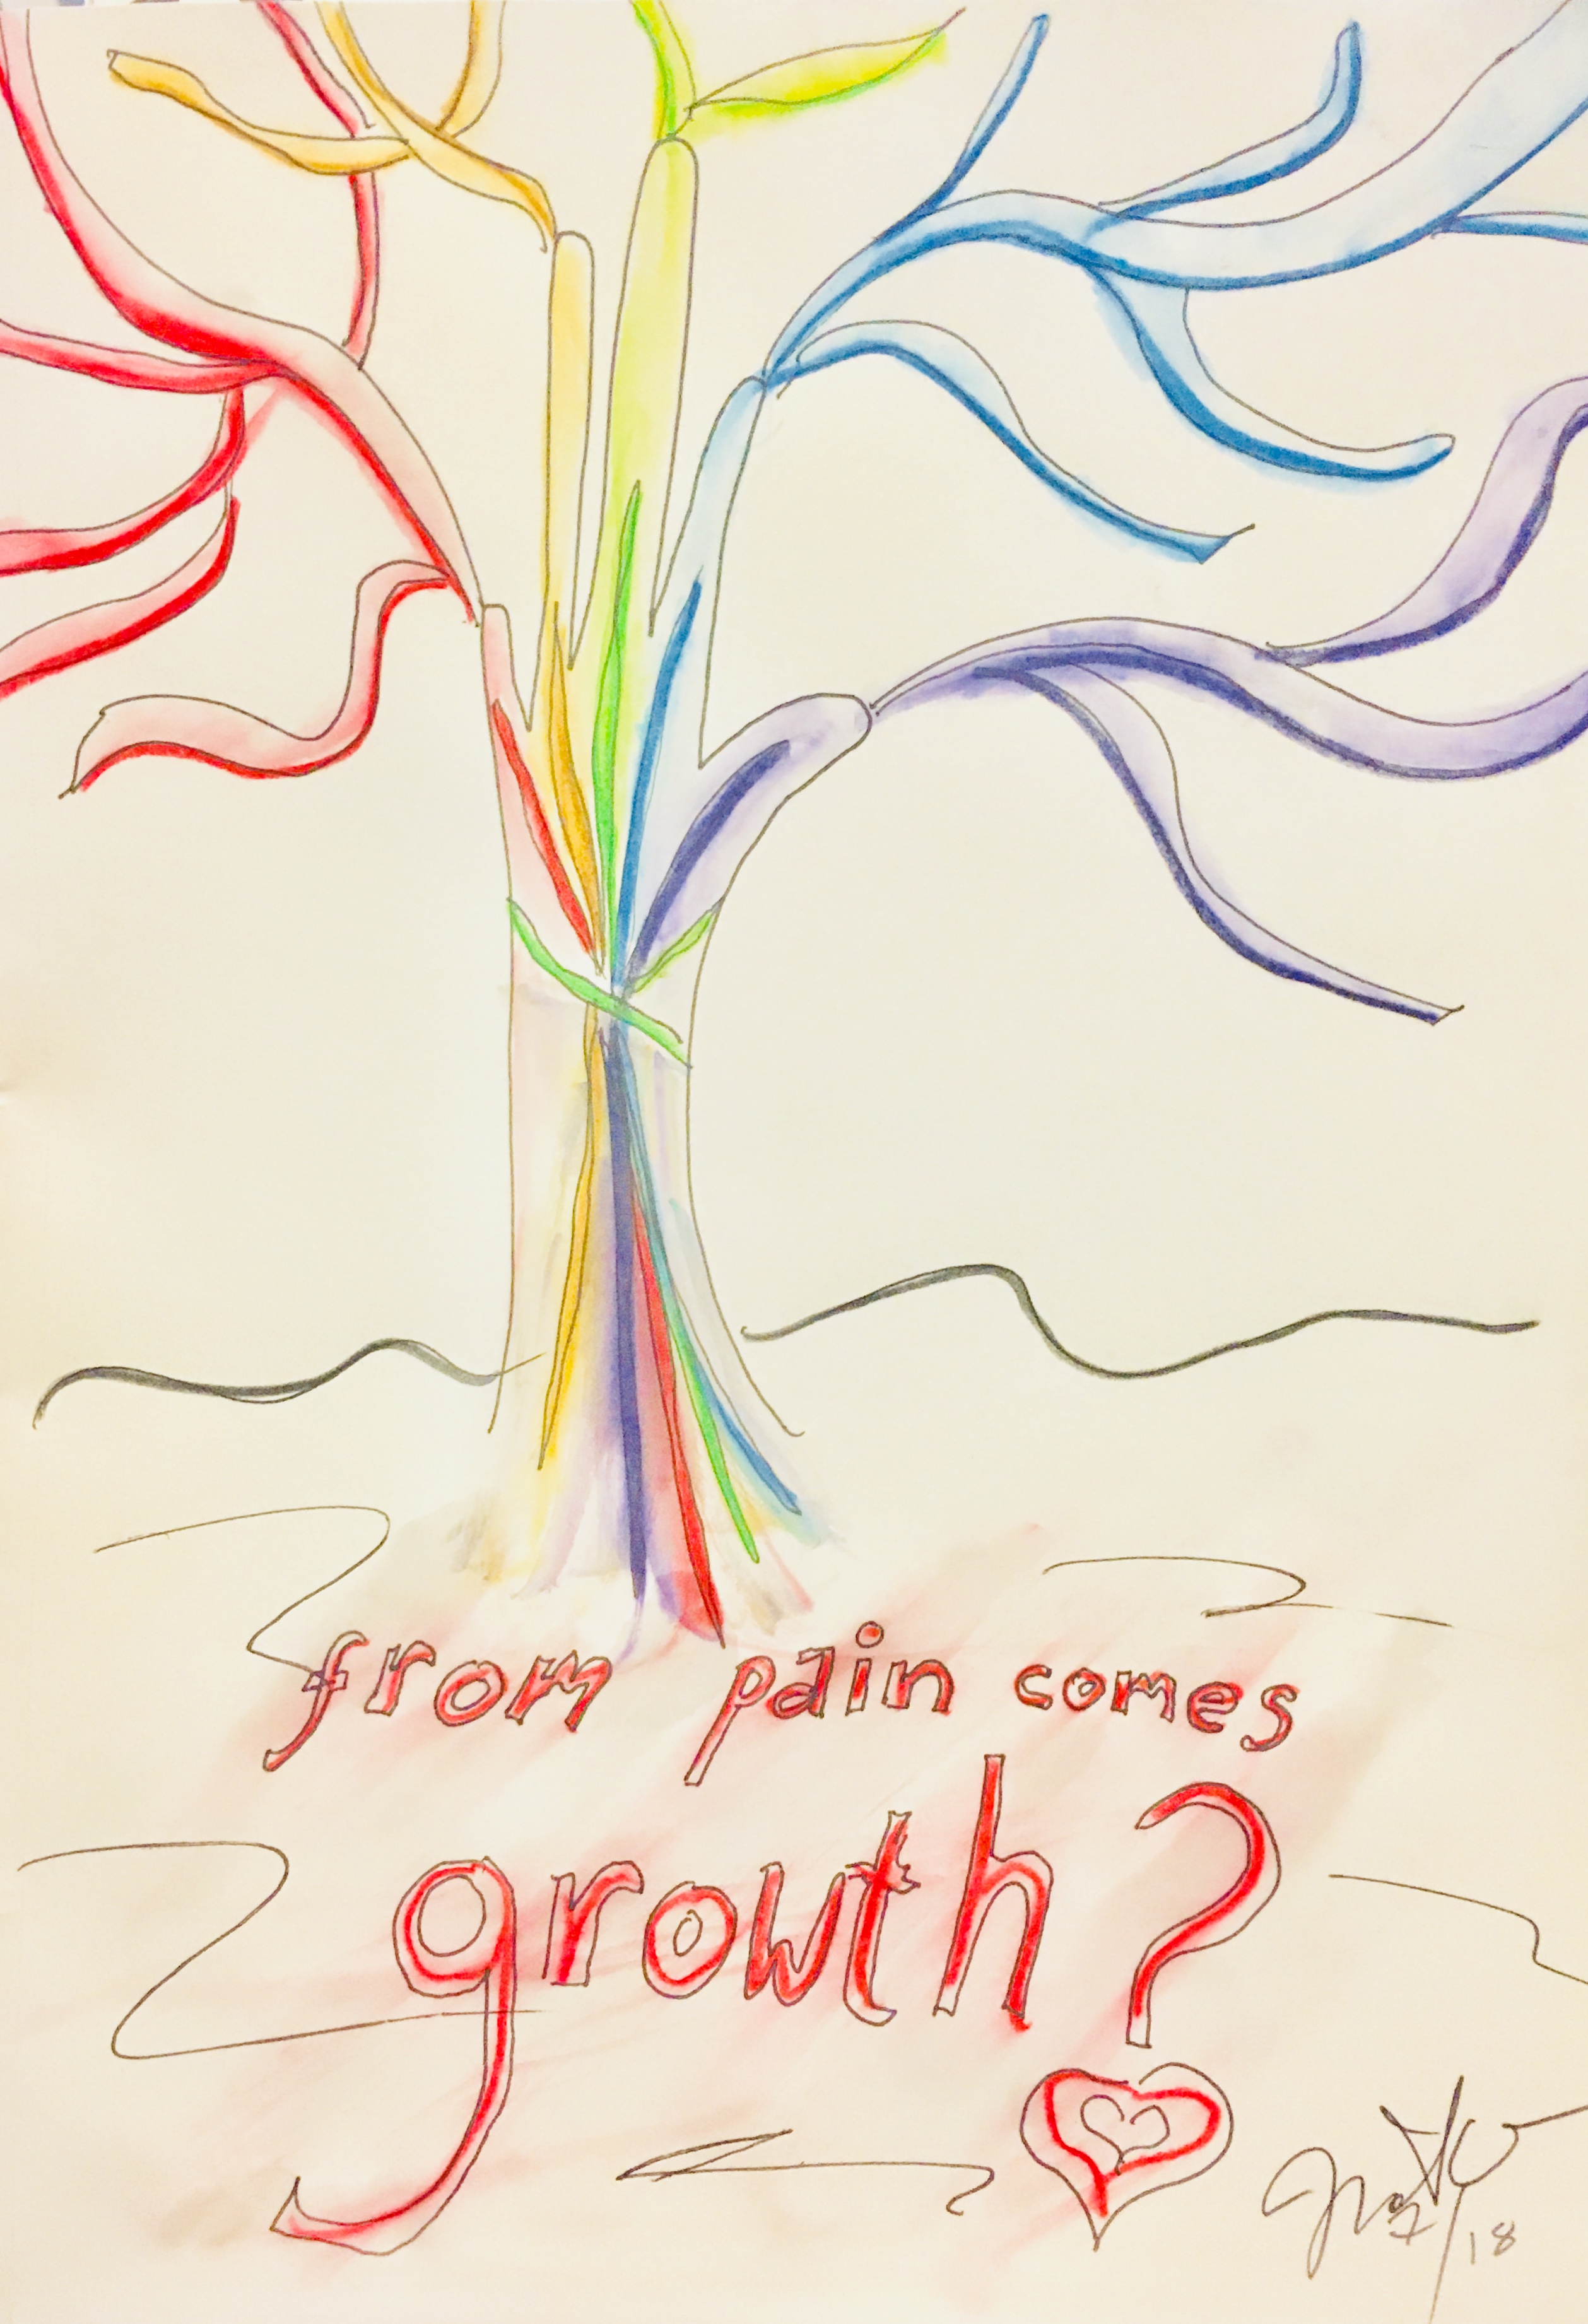 a watercolor image of a tree with five branches ,shaped like a hand, each finger one color of the rainbow, but after a certain point in the trunk each color becomes muddled together in a confusing mess. A caption in red block letters that “bleed” into the background like scratches reads, “from pain comes growth” with a question mark.